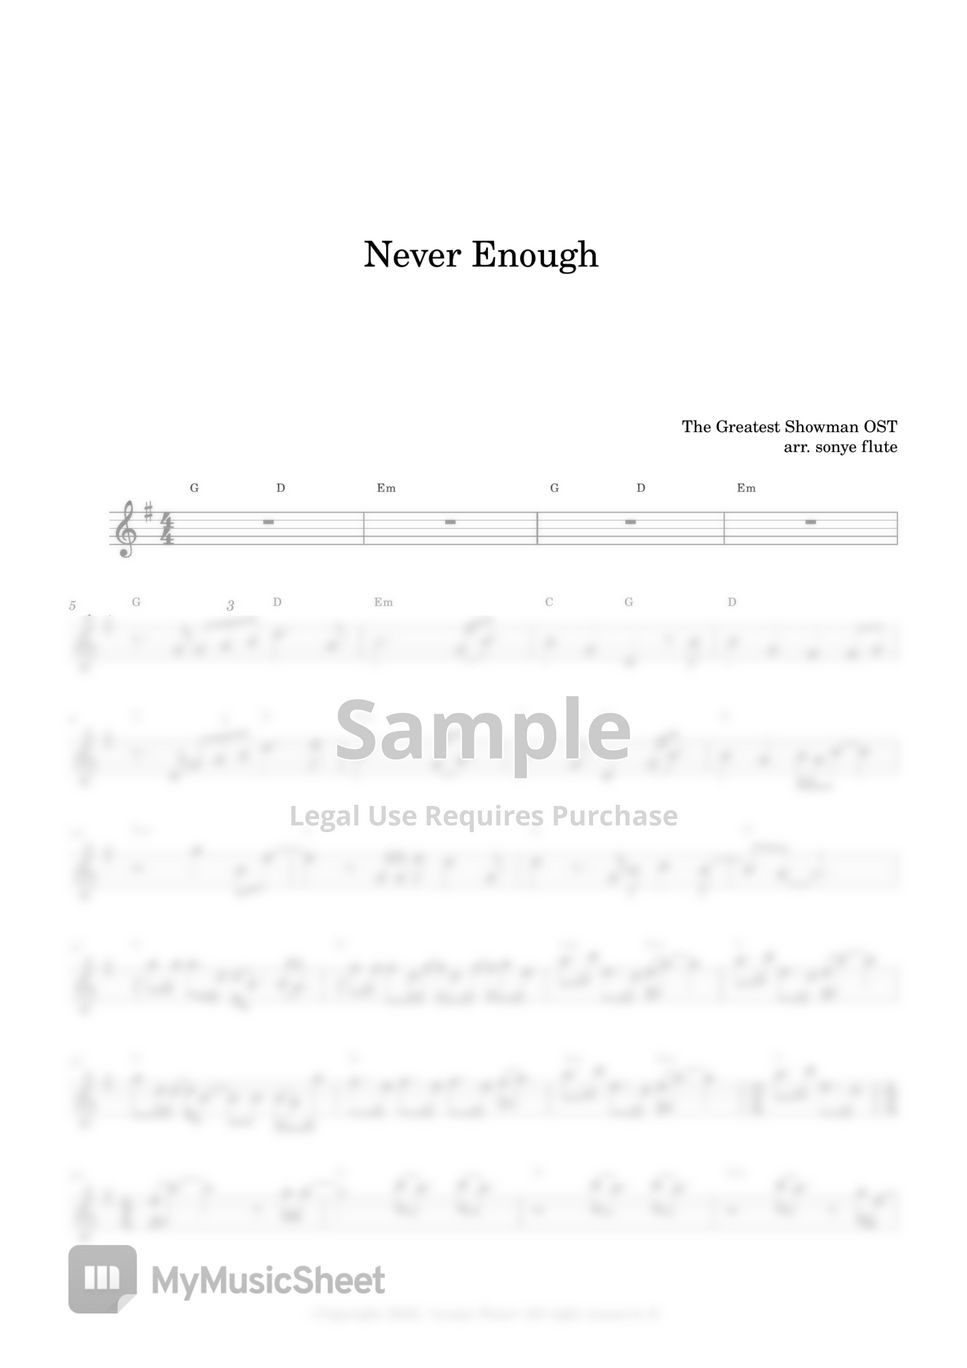 The Greatest Showman OST - Never Enough (Flute Sheet Music Easy) by sonye flute